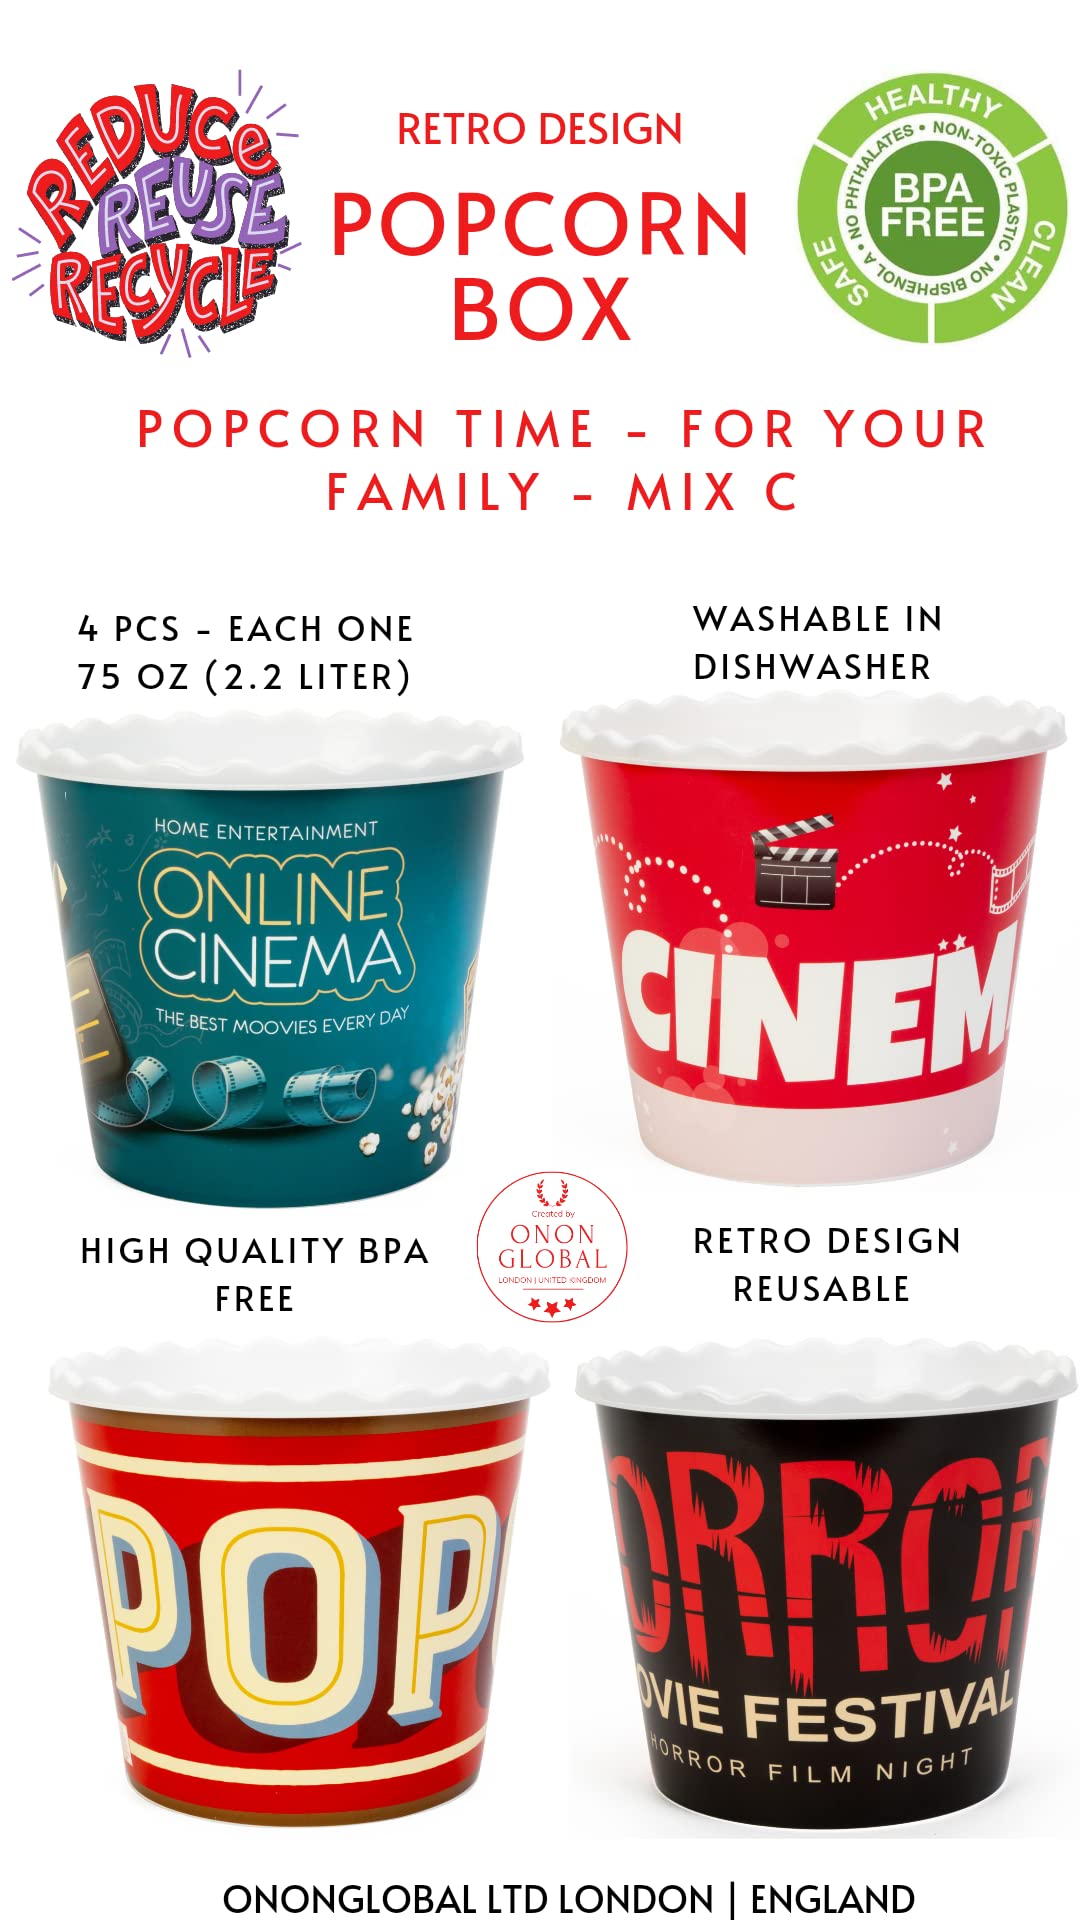 Grehge le Plastic Popcorn Containers/Popcorn Bowls Set for Movie Theater Night - Washable in The Dishwasher - (BPA Free-4 Pack) (Mix C)